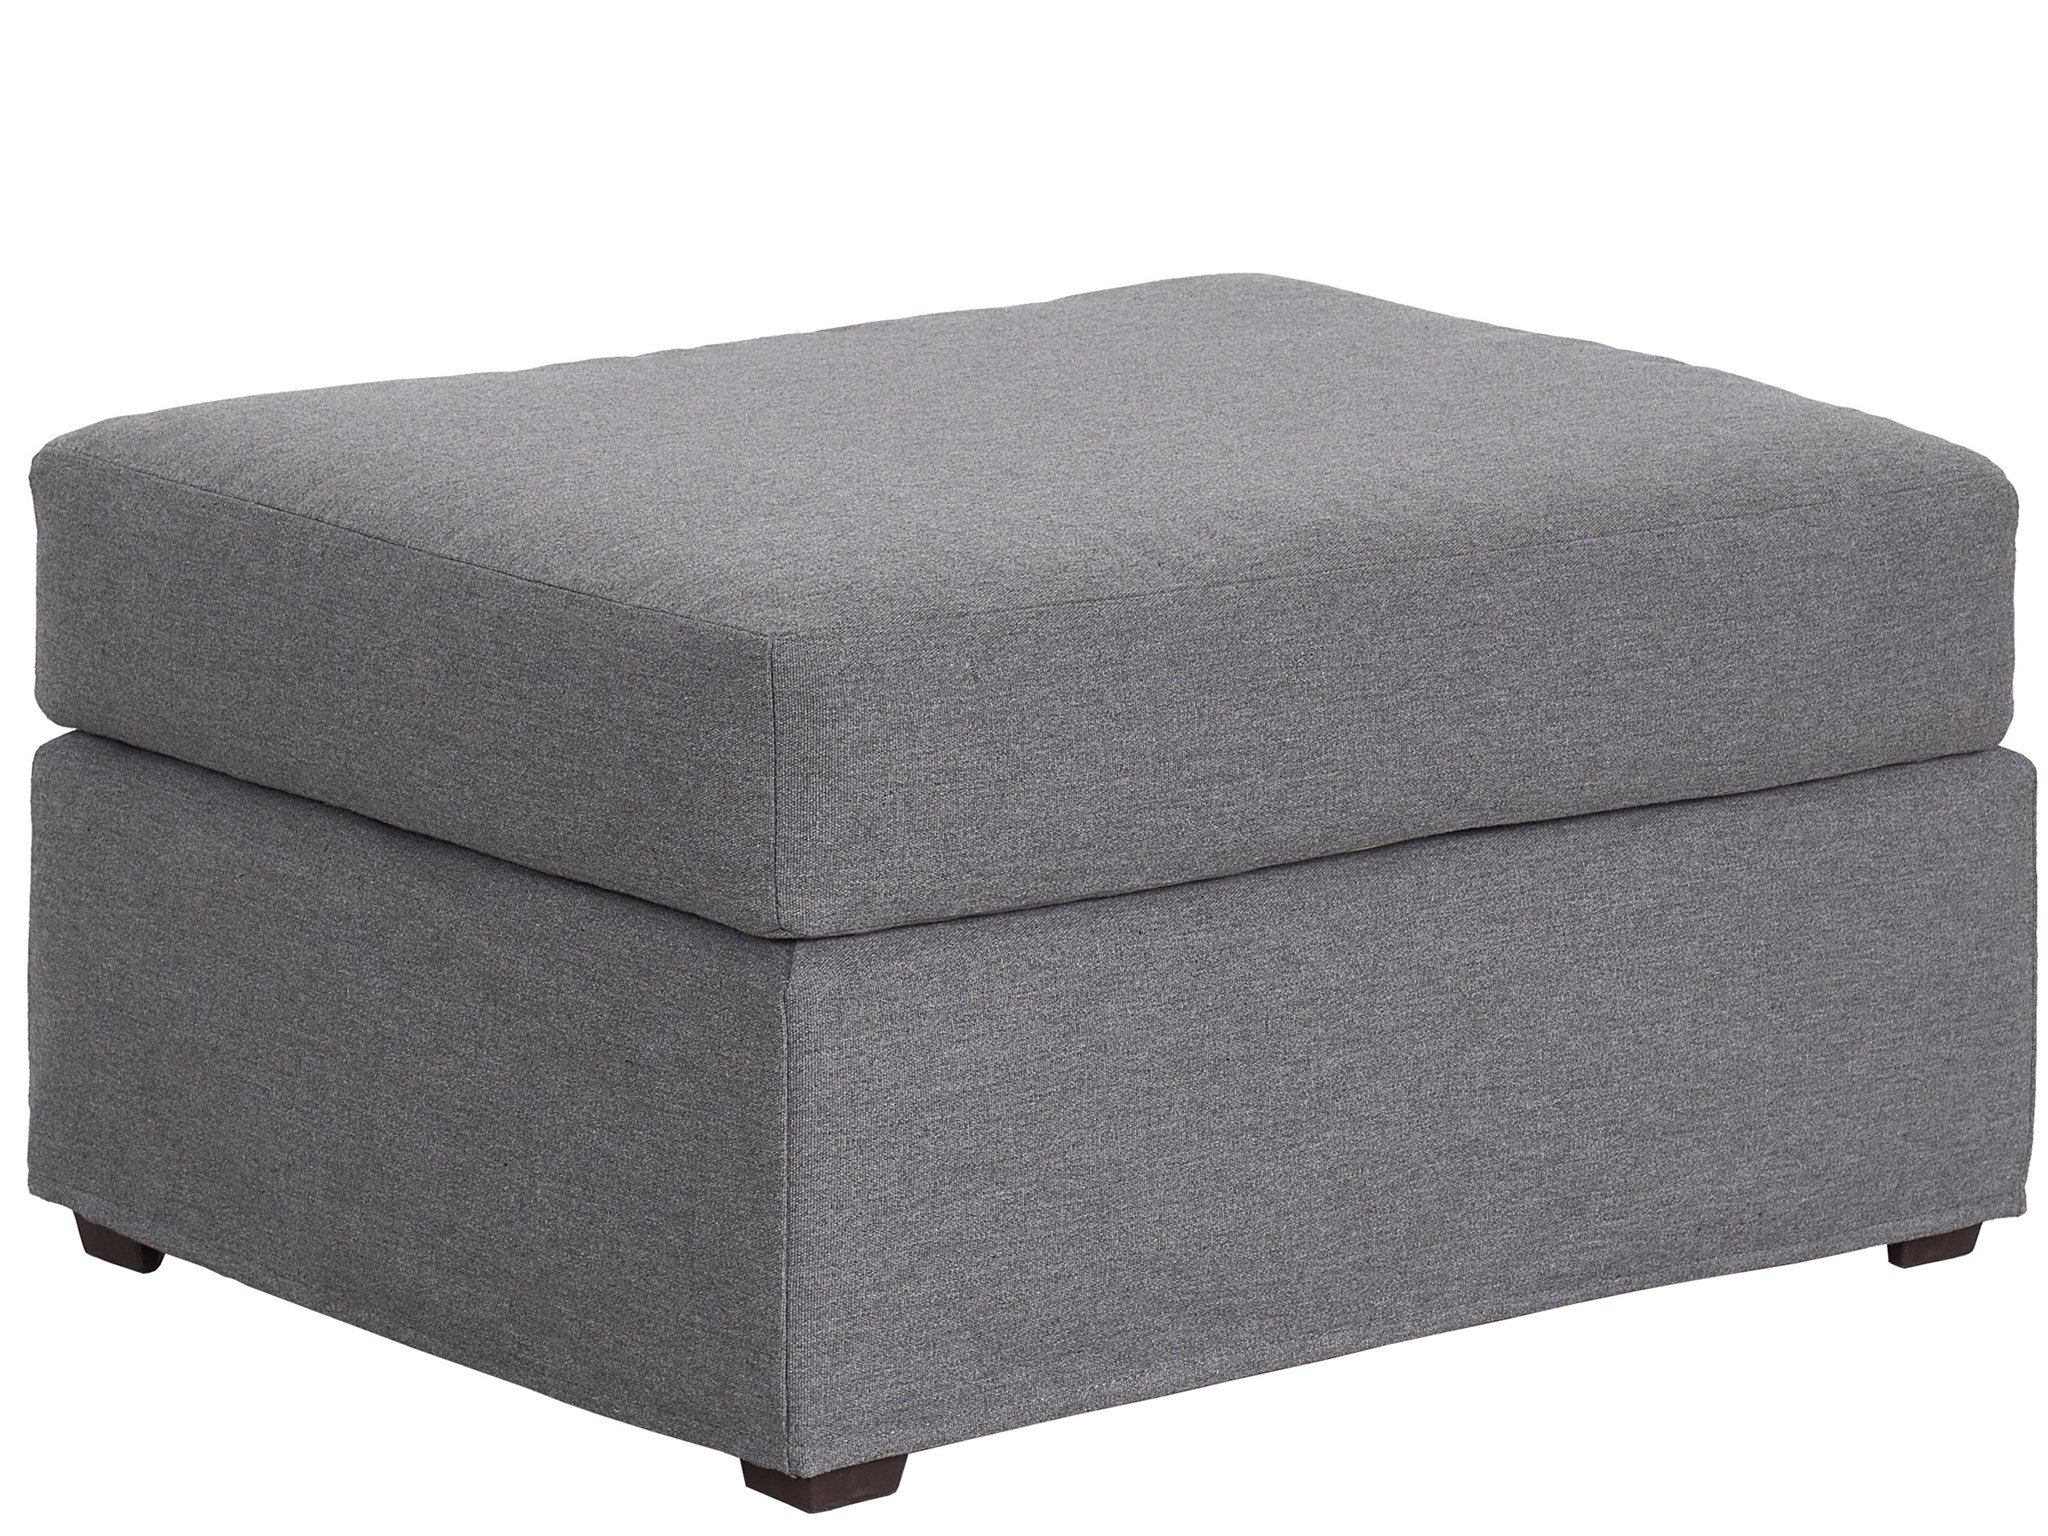 Brooke Outdoor Ottoman - Special Order